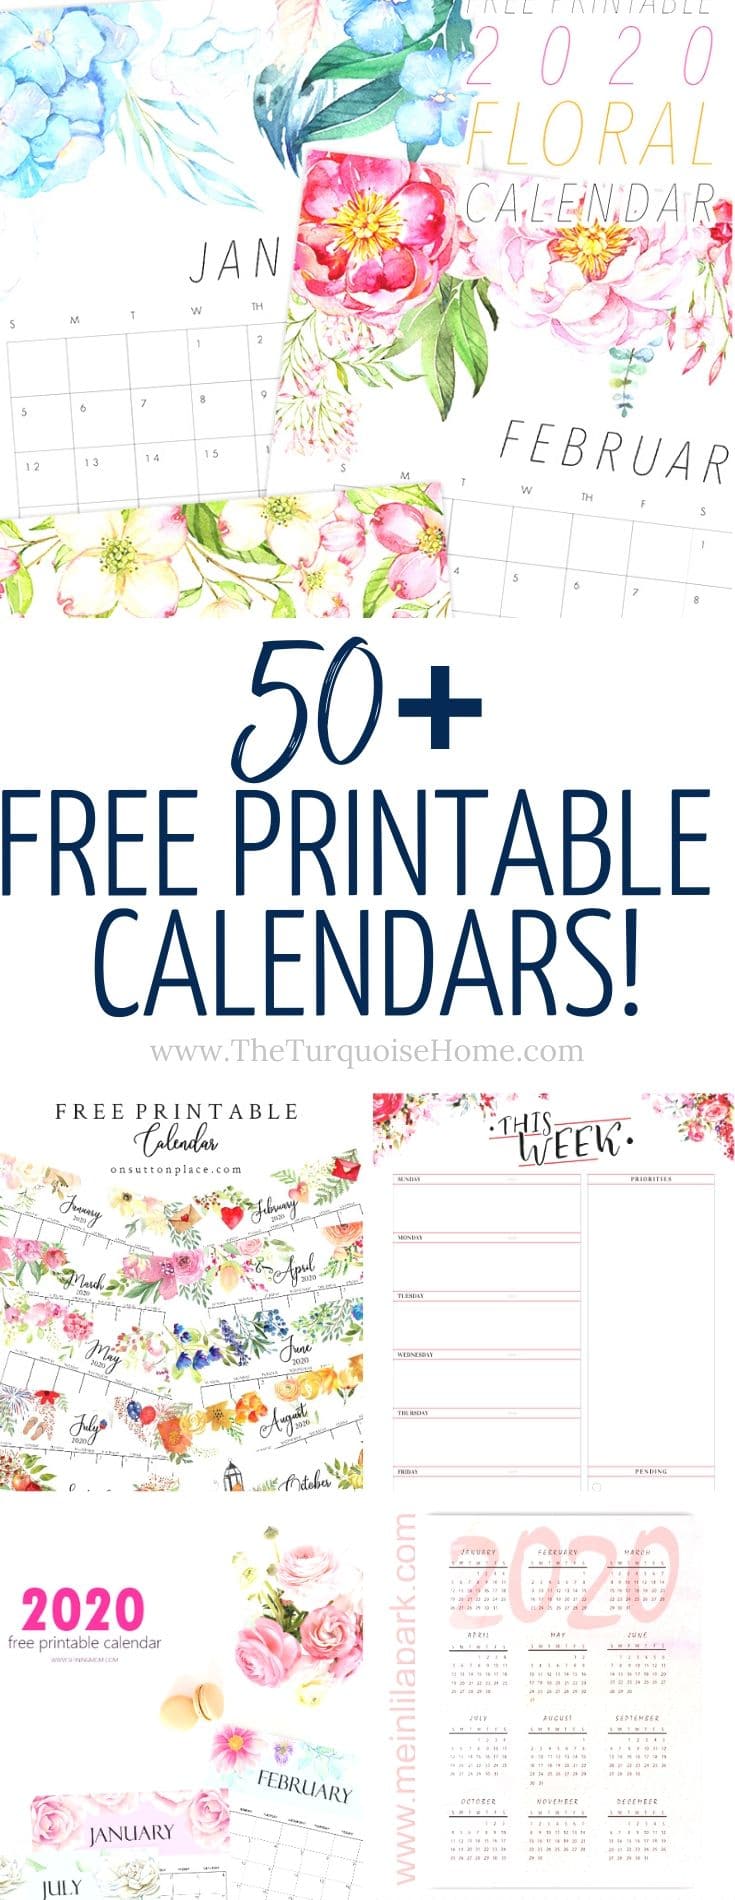 50 Free Printable Calendars For 2021 The Turquoise Home